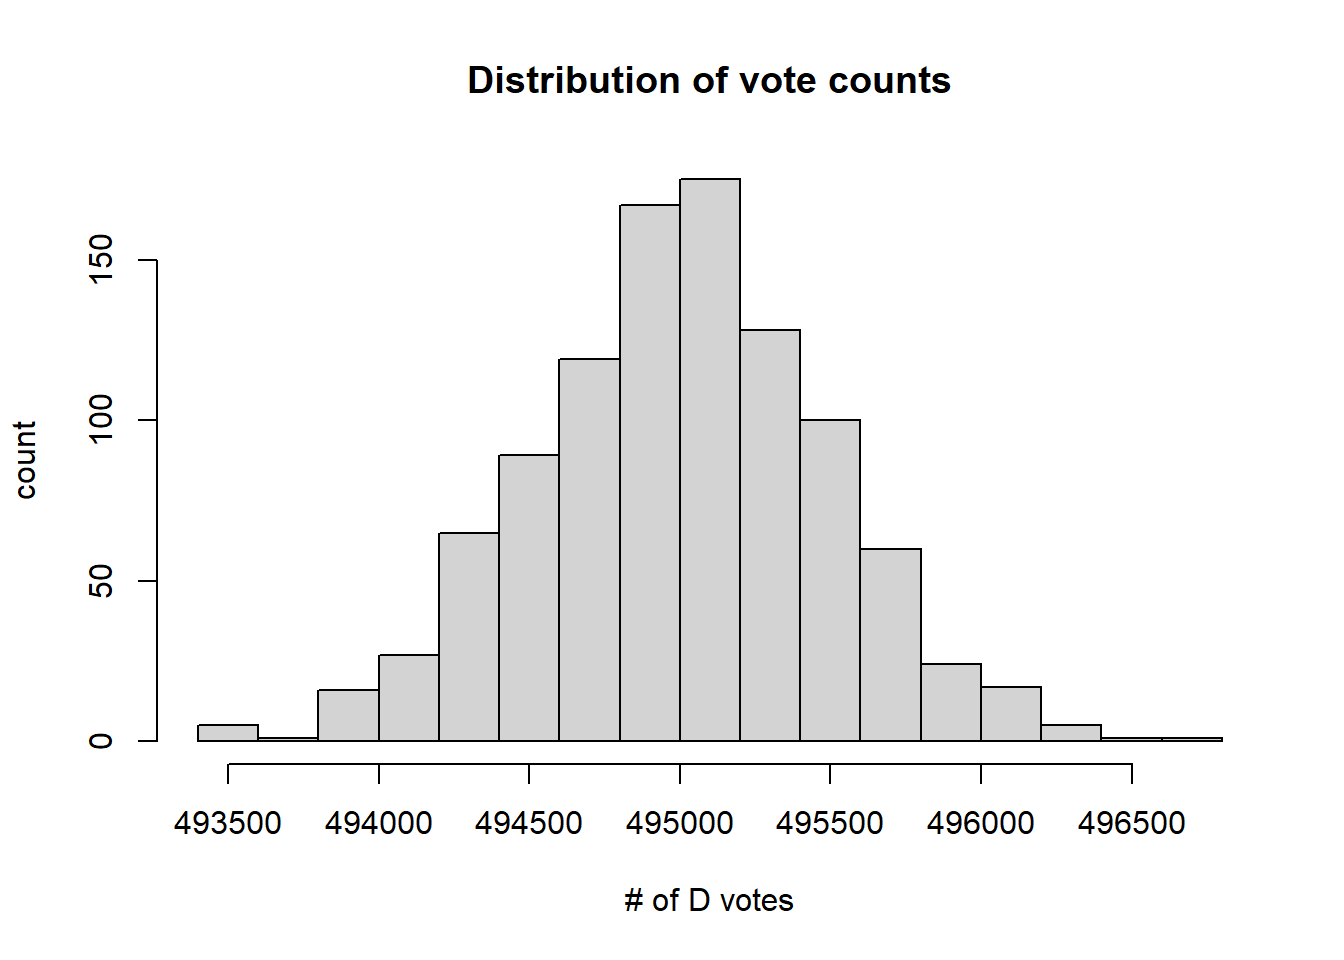 Simulated election results from a Binomial model with $p=0.495$ and $n=1000000$